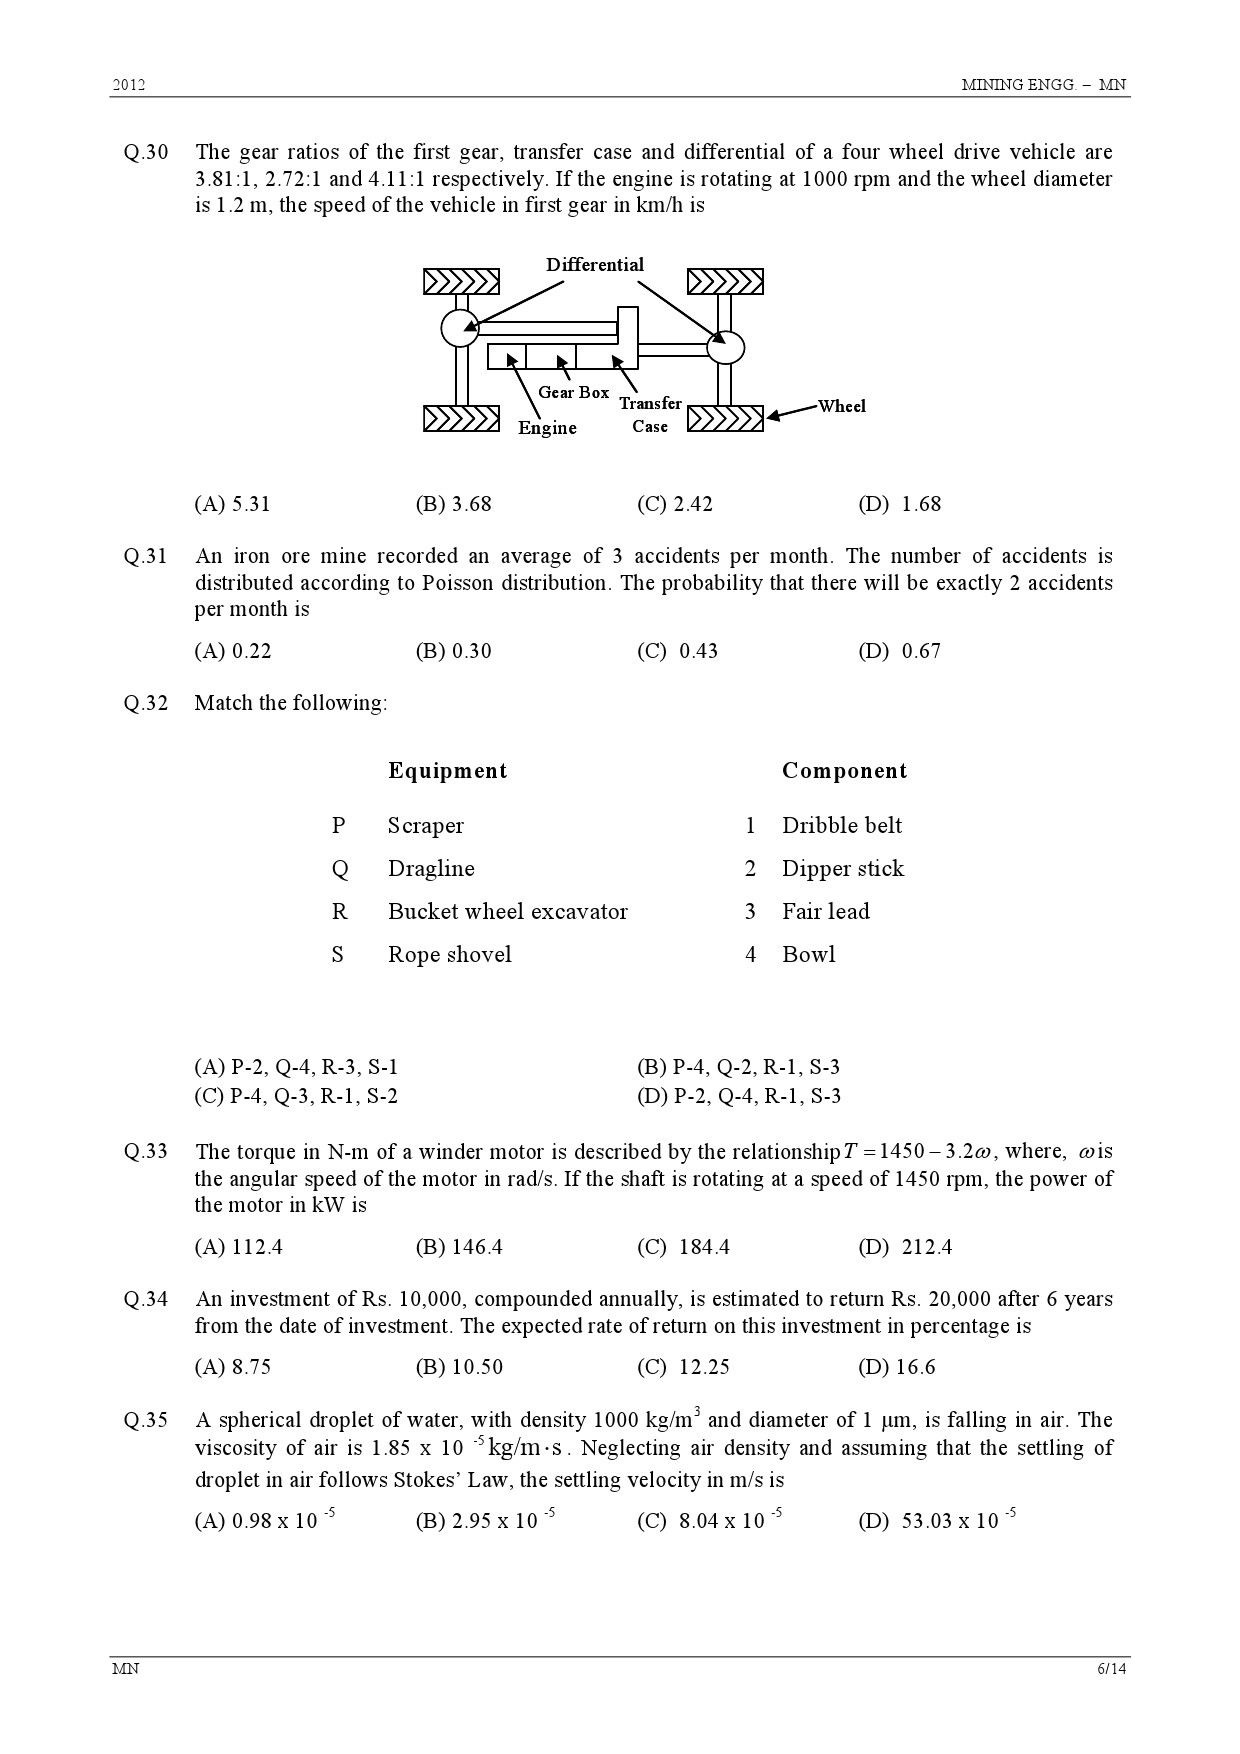 GATE Exam Question Paper 2012 Mining Engineering 6